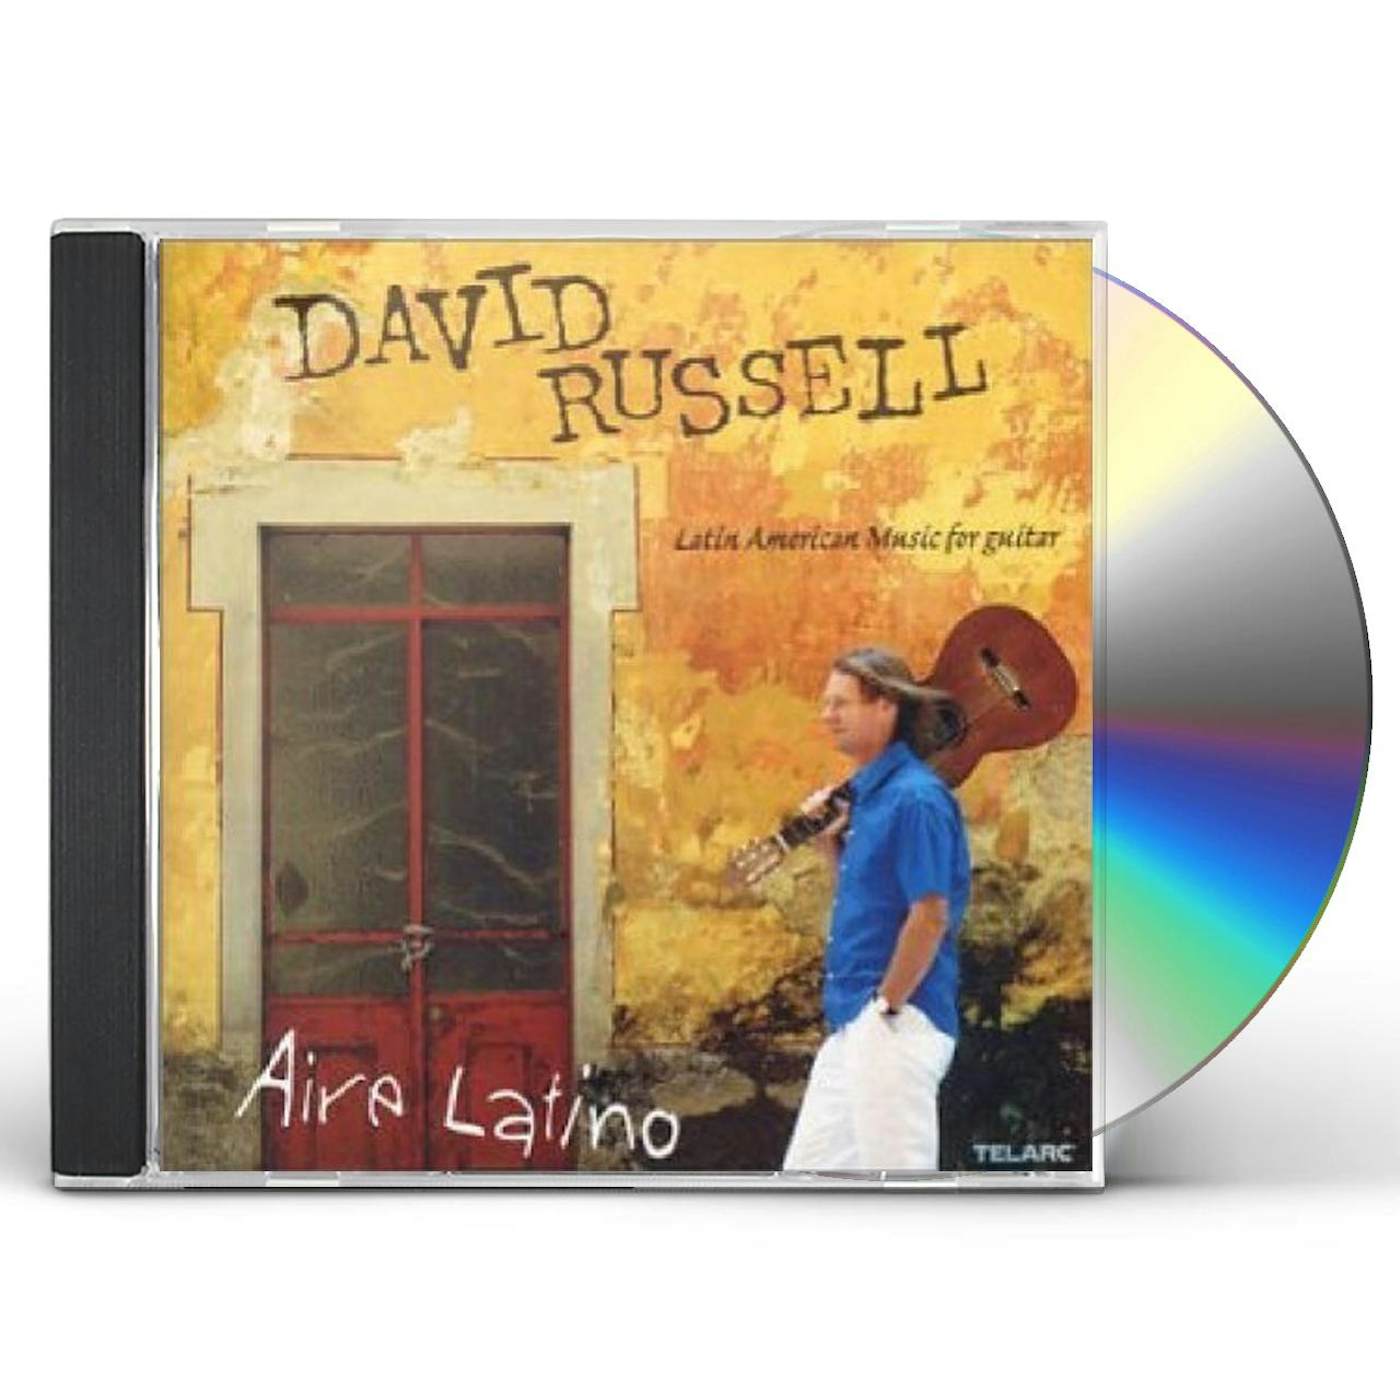 David Russell AIRE LATINO CD